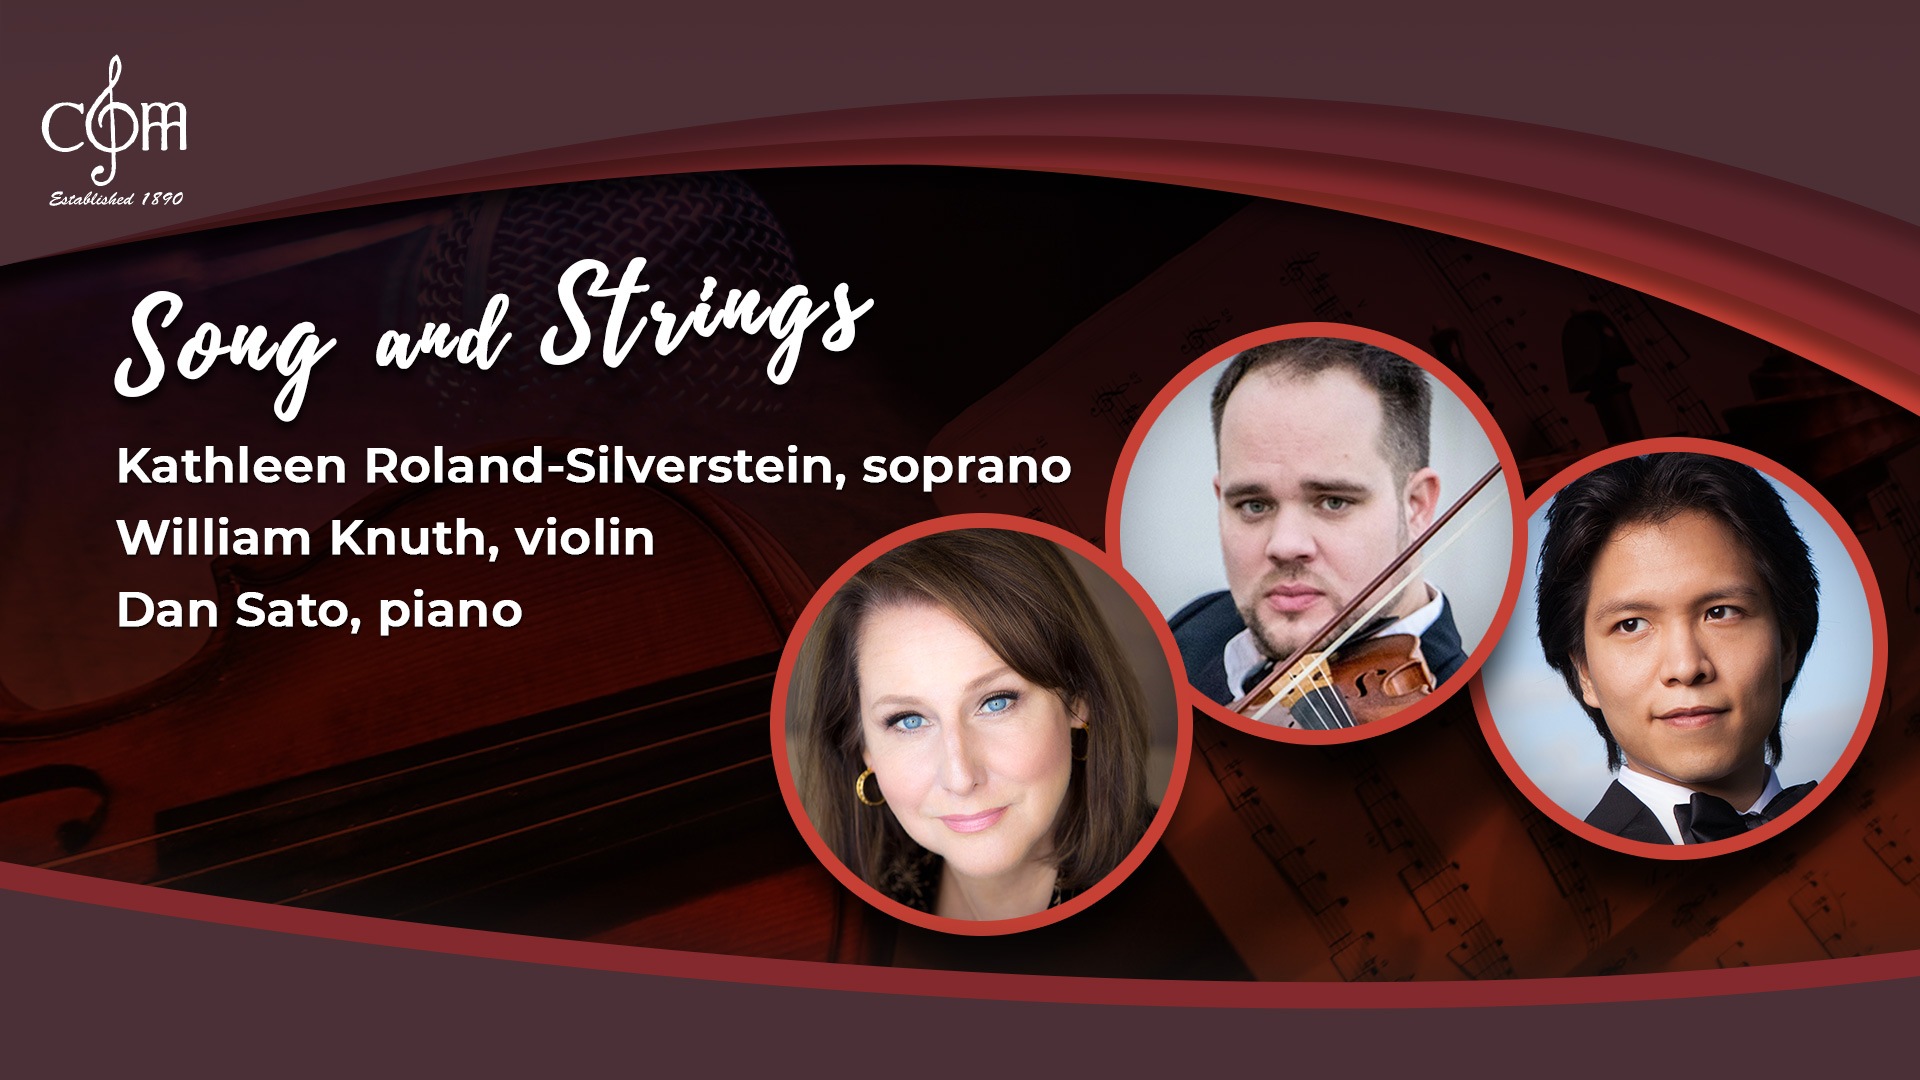 CMM Live! “Song and Strings” with Kathleen Roland-Silverstein, soprano; William Knuth, violin & Dan Sato, piano